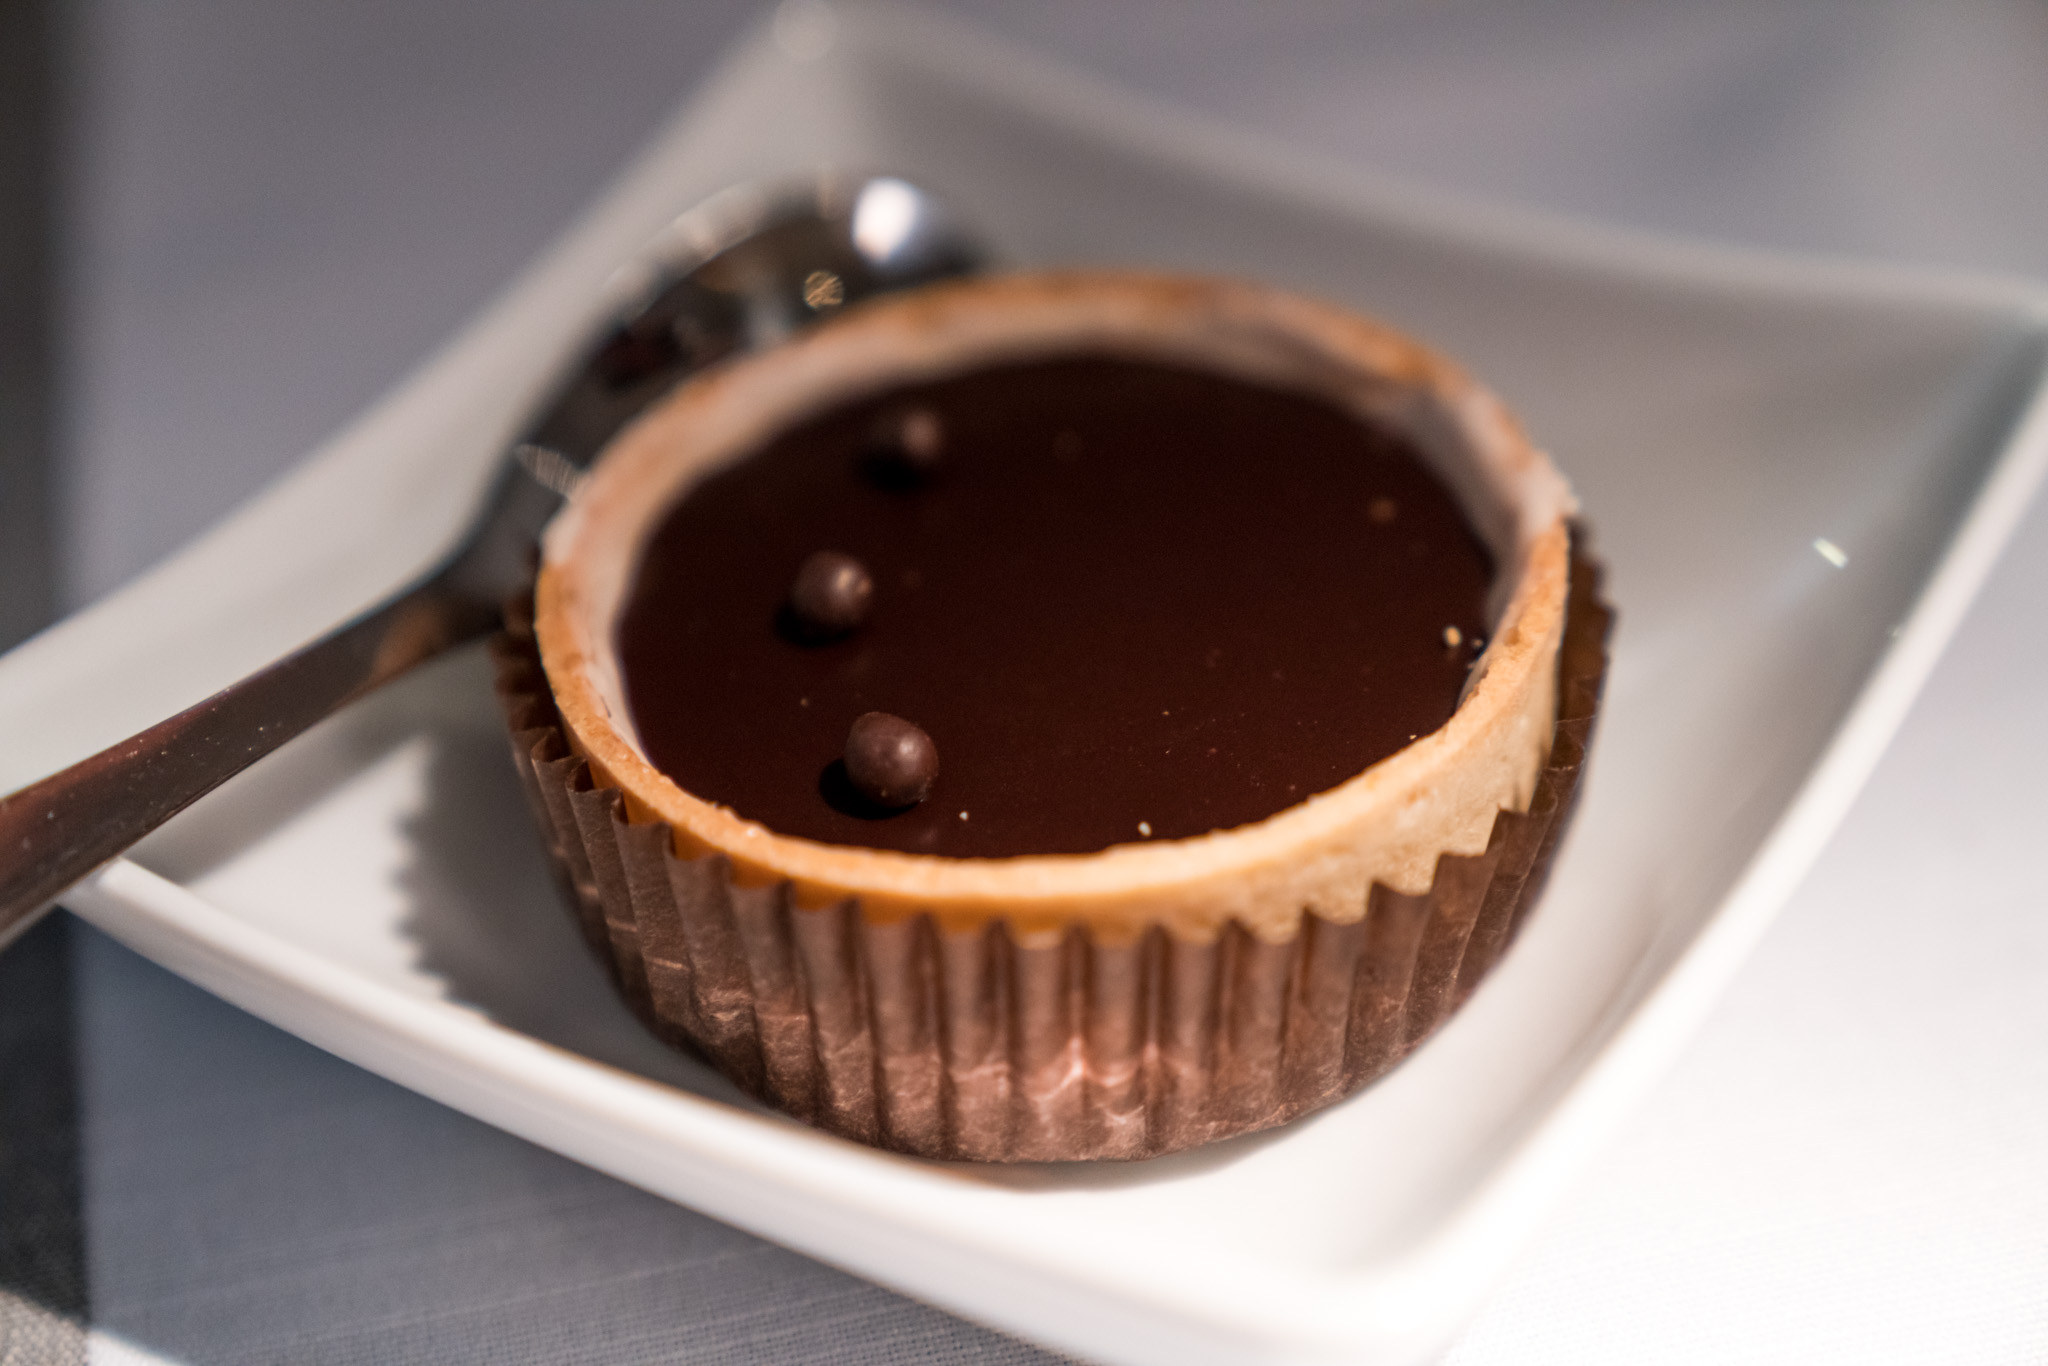 a small chocolate tart on a plate with a spoon